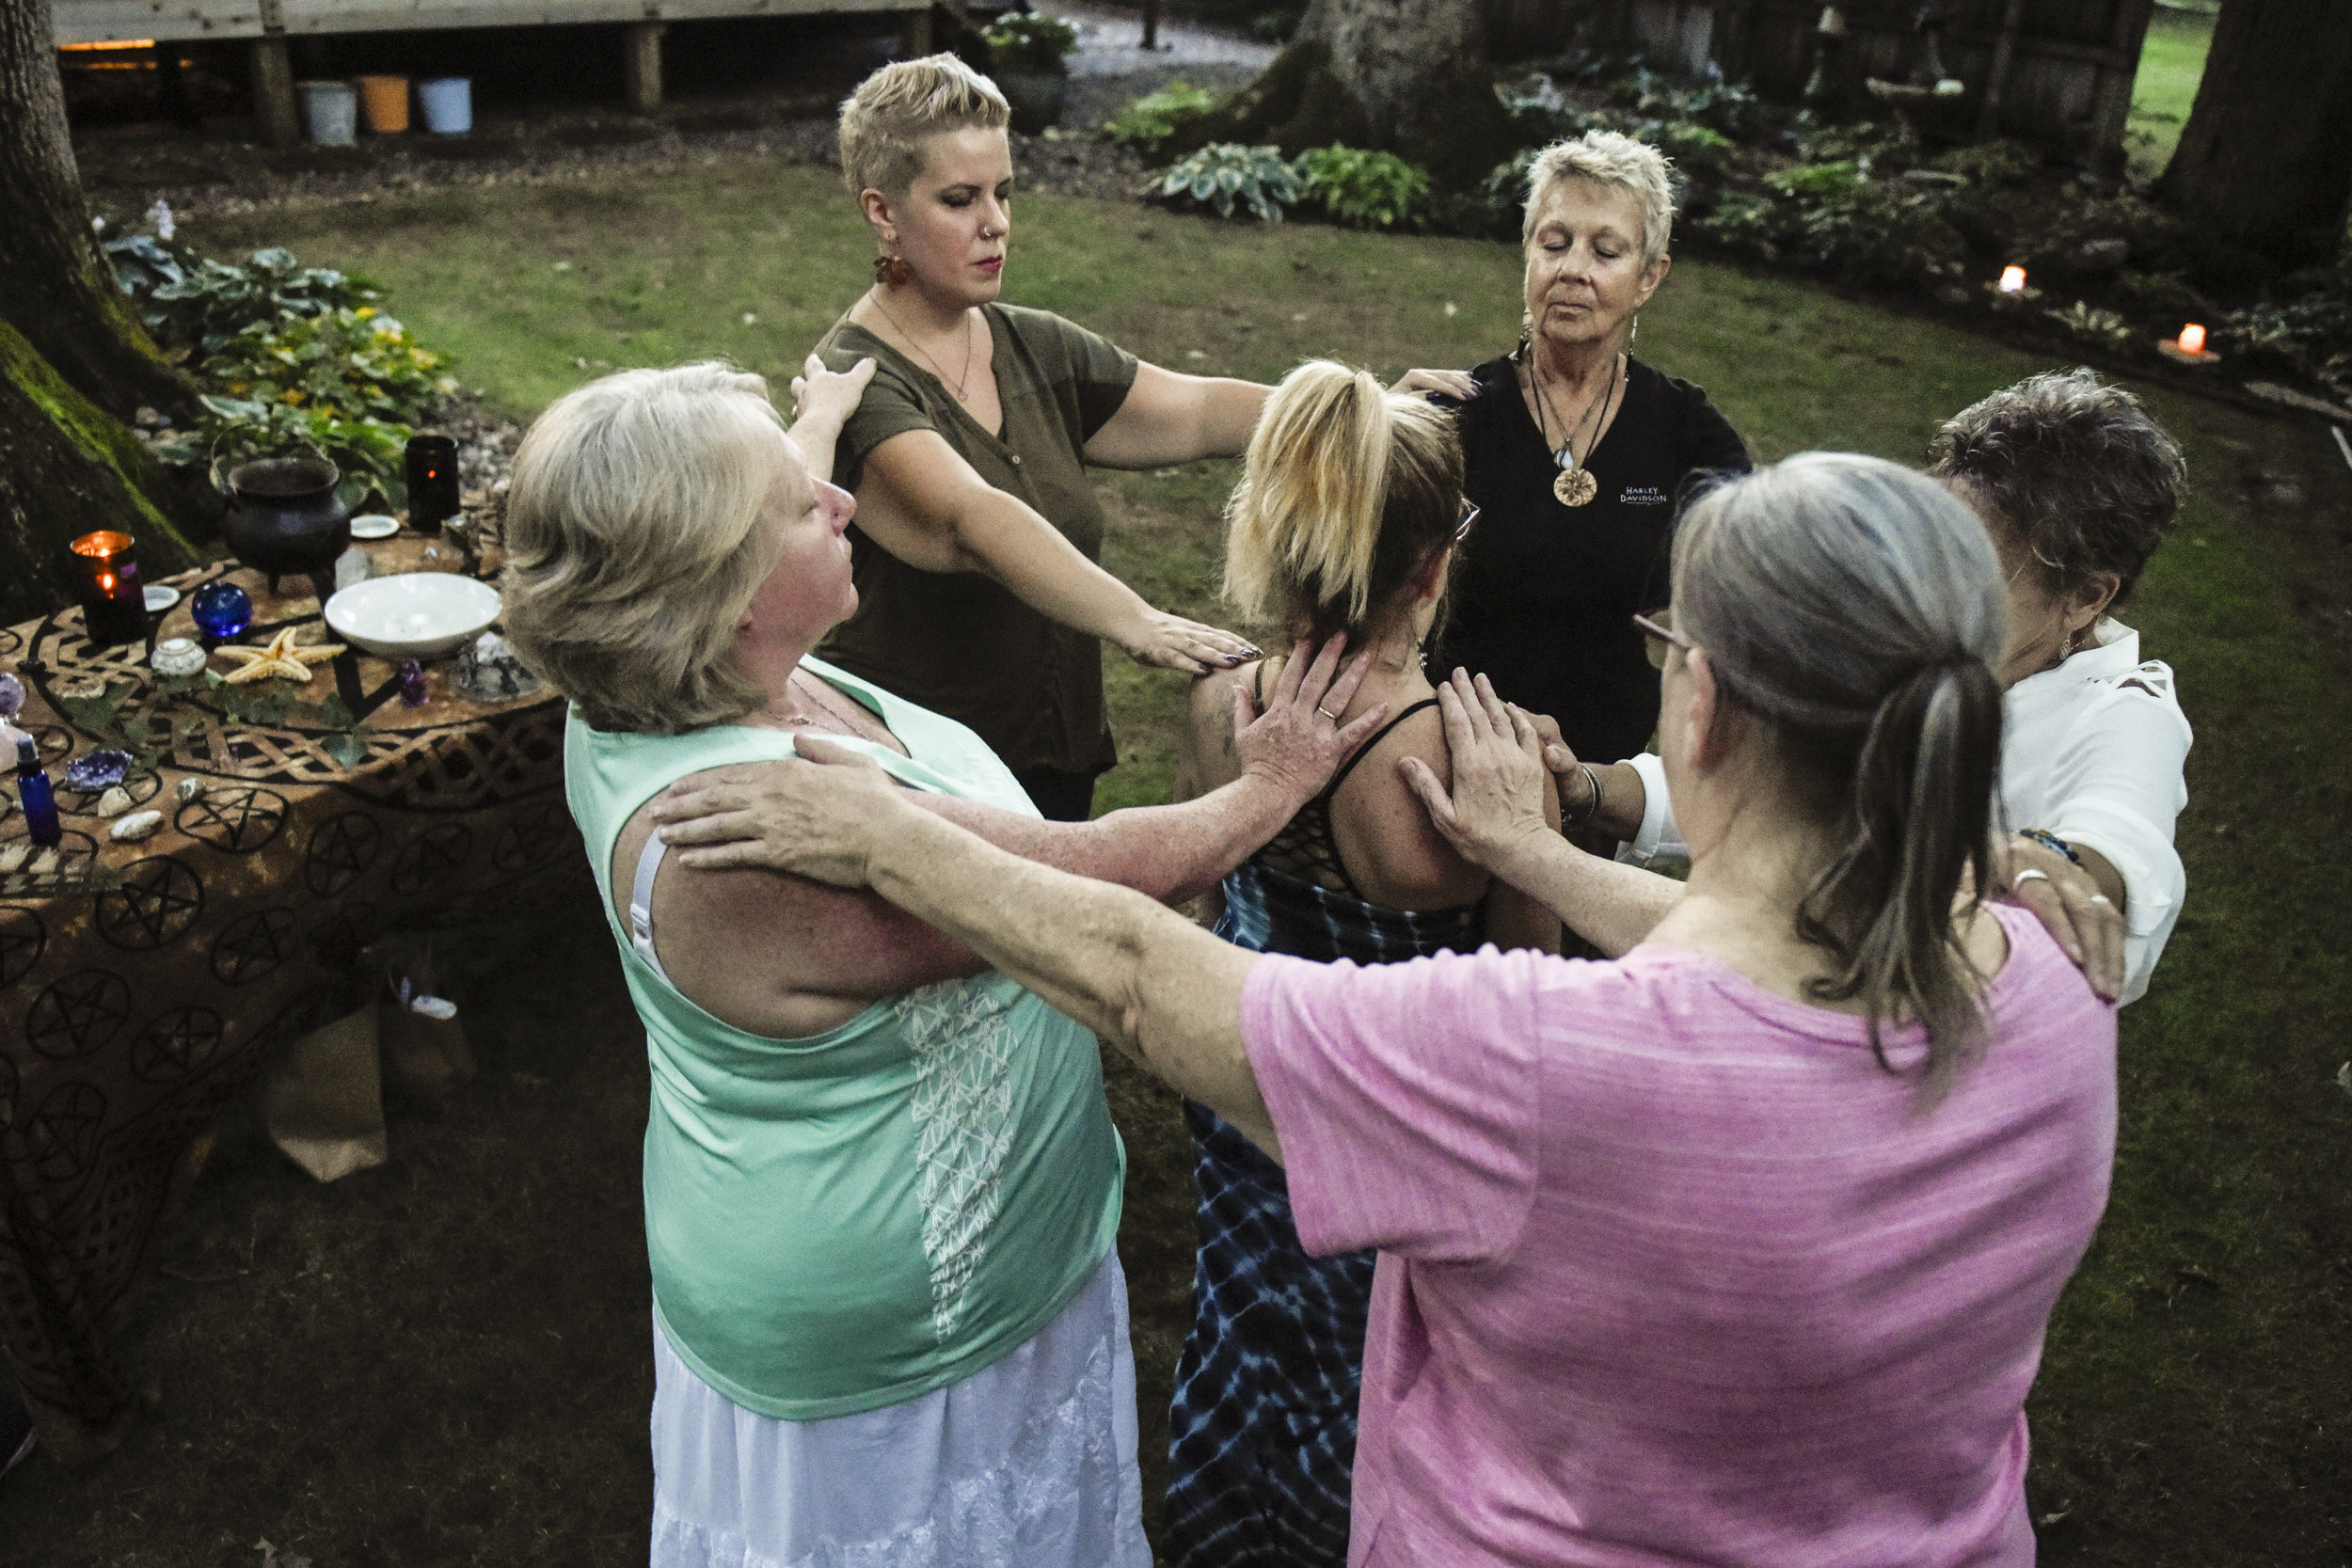  Members of the Crafting Witches coven help a friend deal with a traumatic event from her childhood by conducting a cleansing ceremony in the backyard of her East Moline home on Friday, Aug. 17, 2018. The ceremony offers her their love, support and p